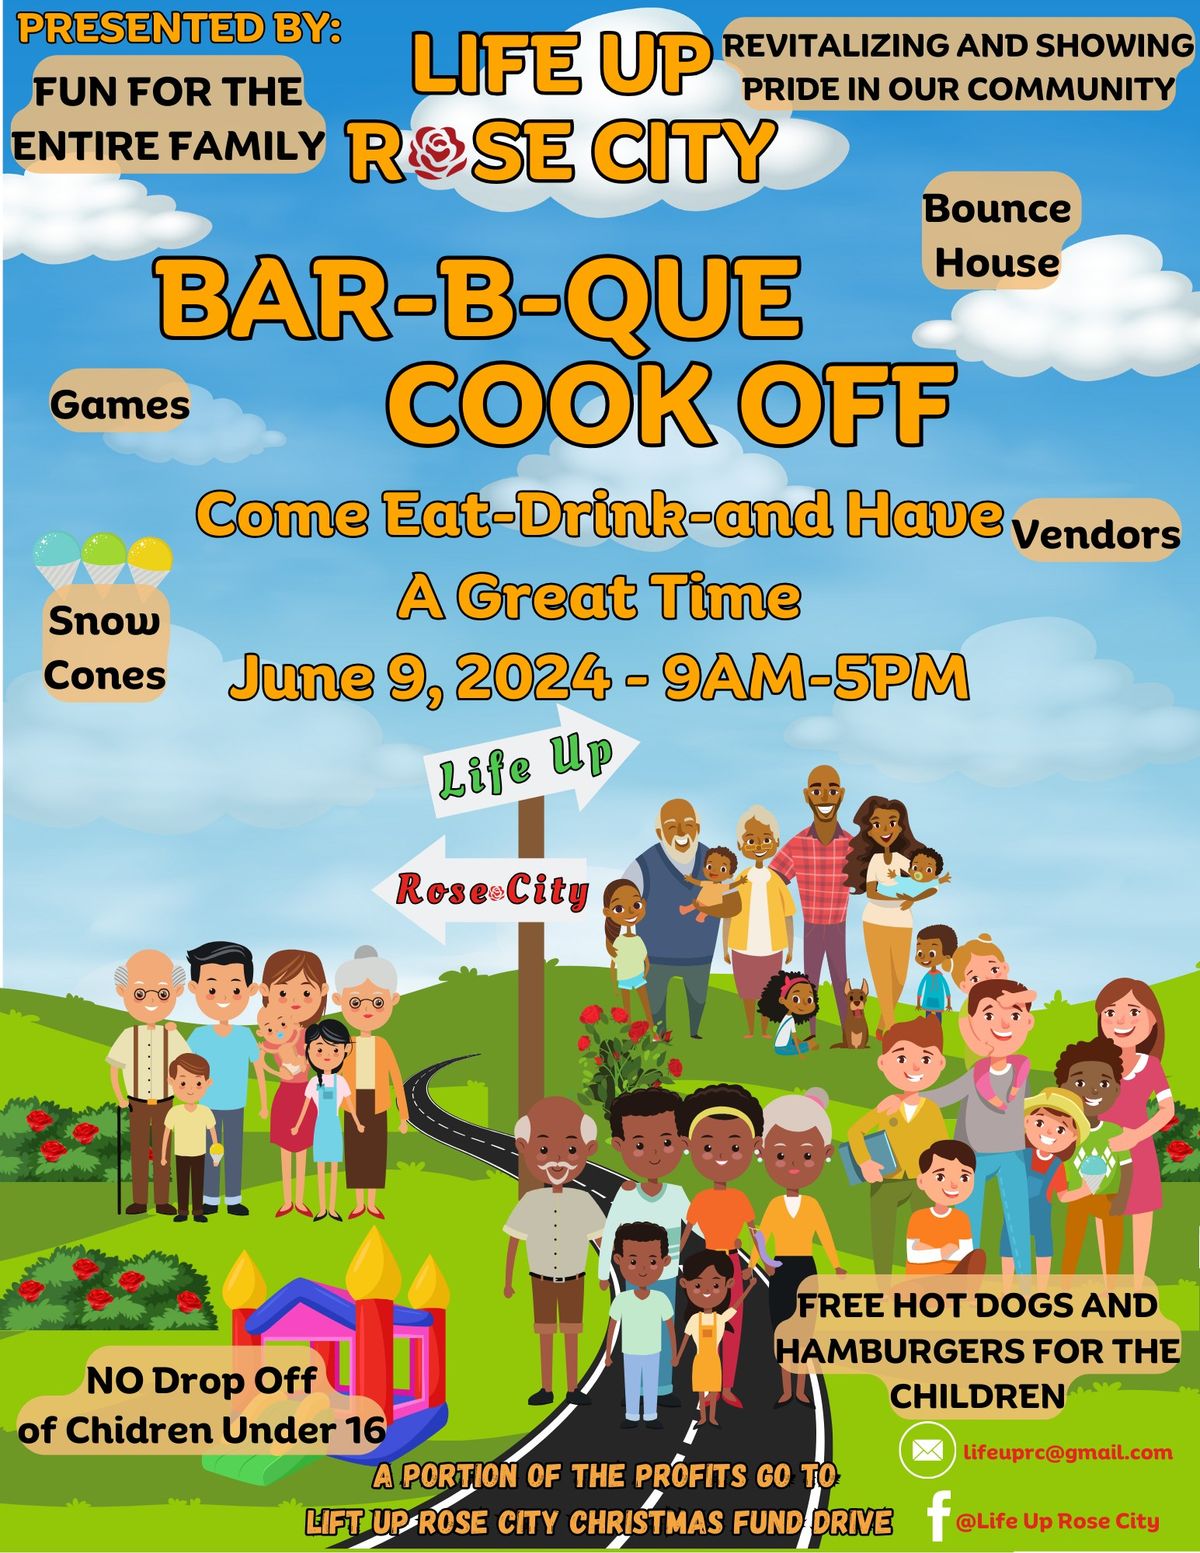 Bar-B-Que Cook Off and Community Event Presented by Life Up Rose City